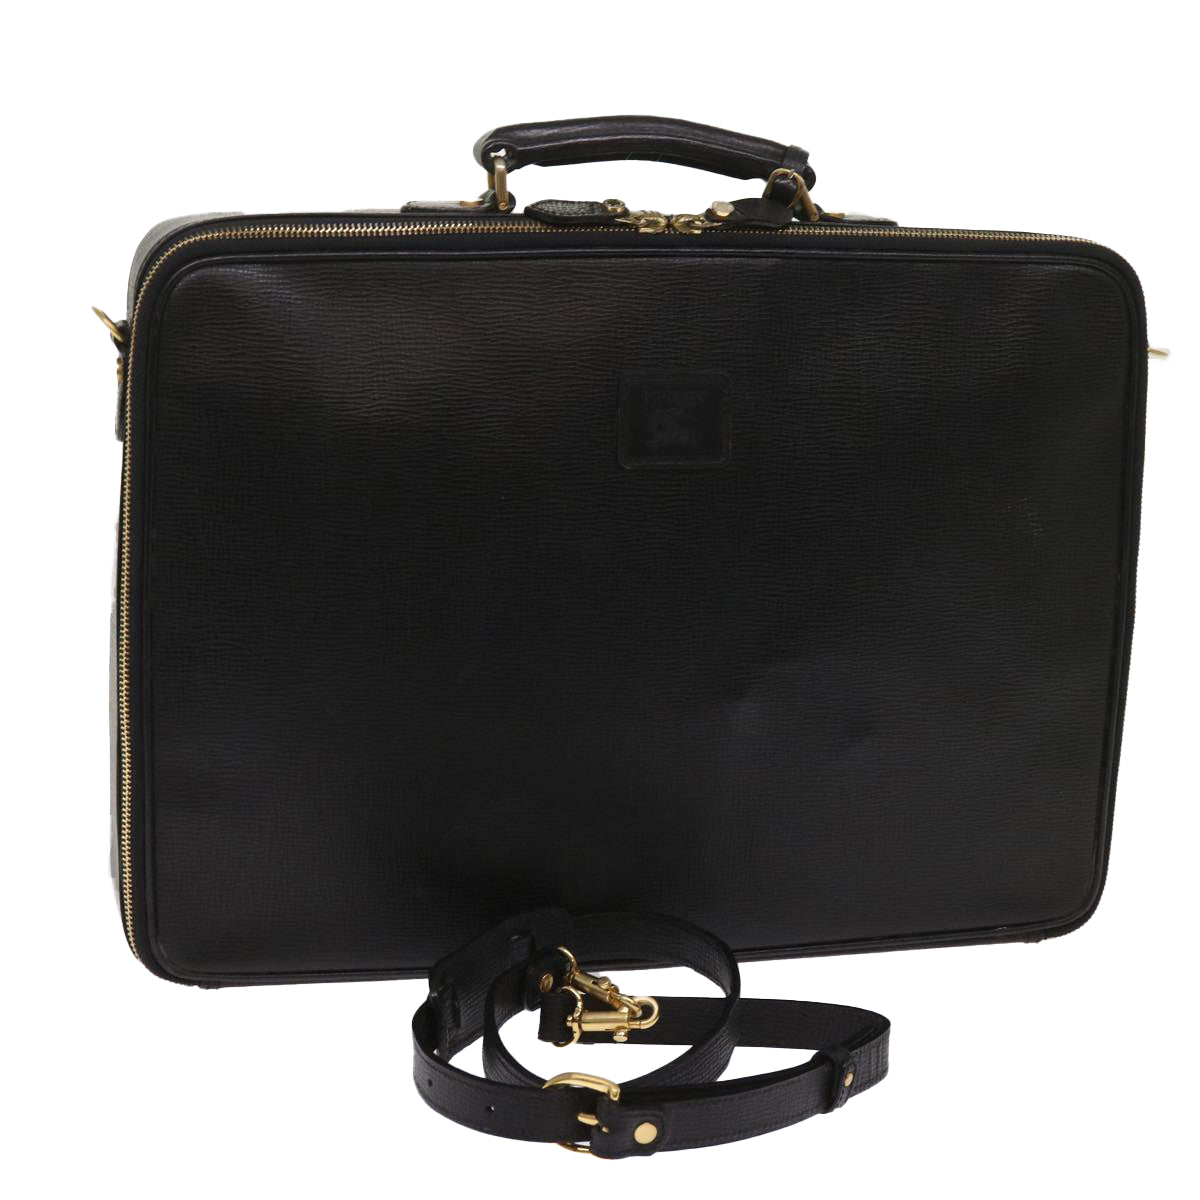 Burberrys Business Bag Leather 2way Black Auth ac2626